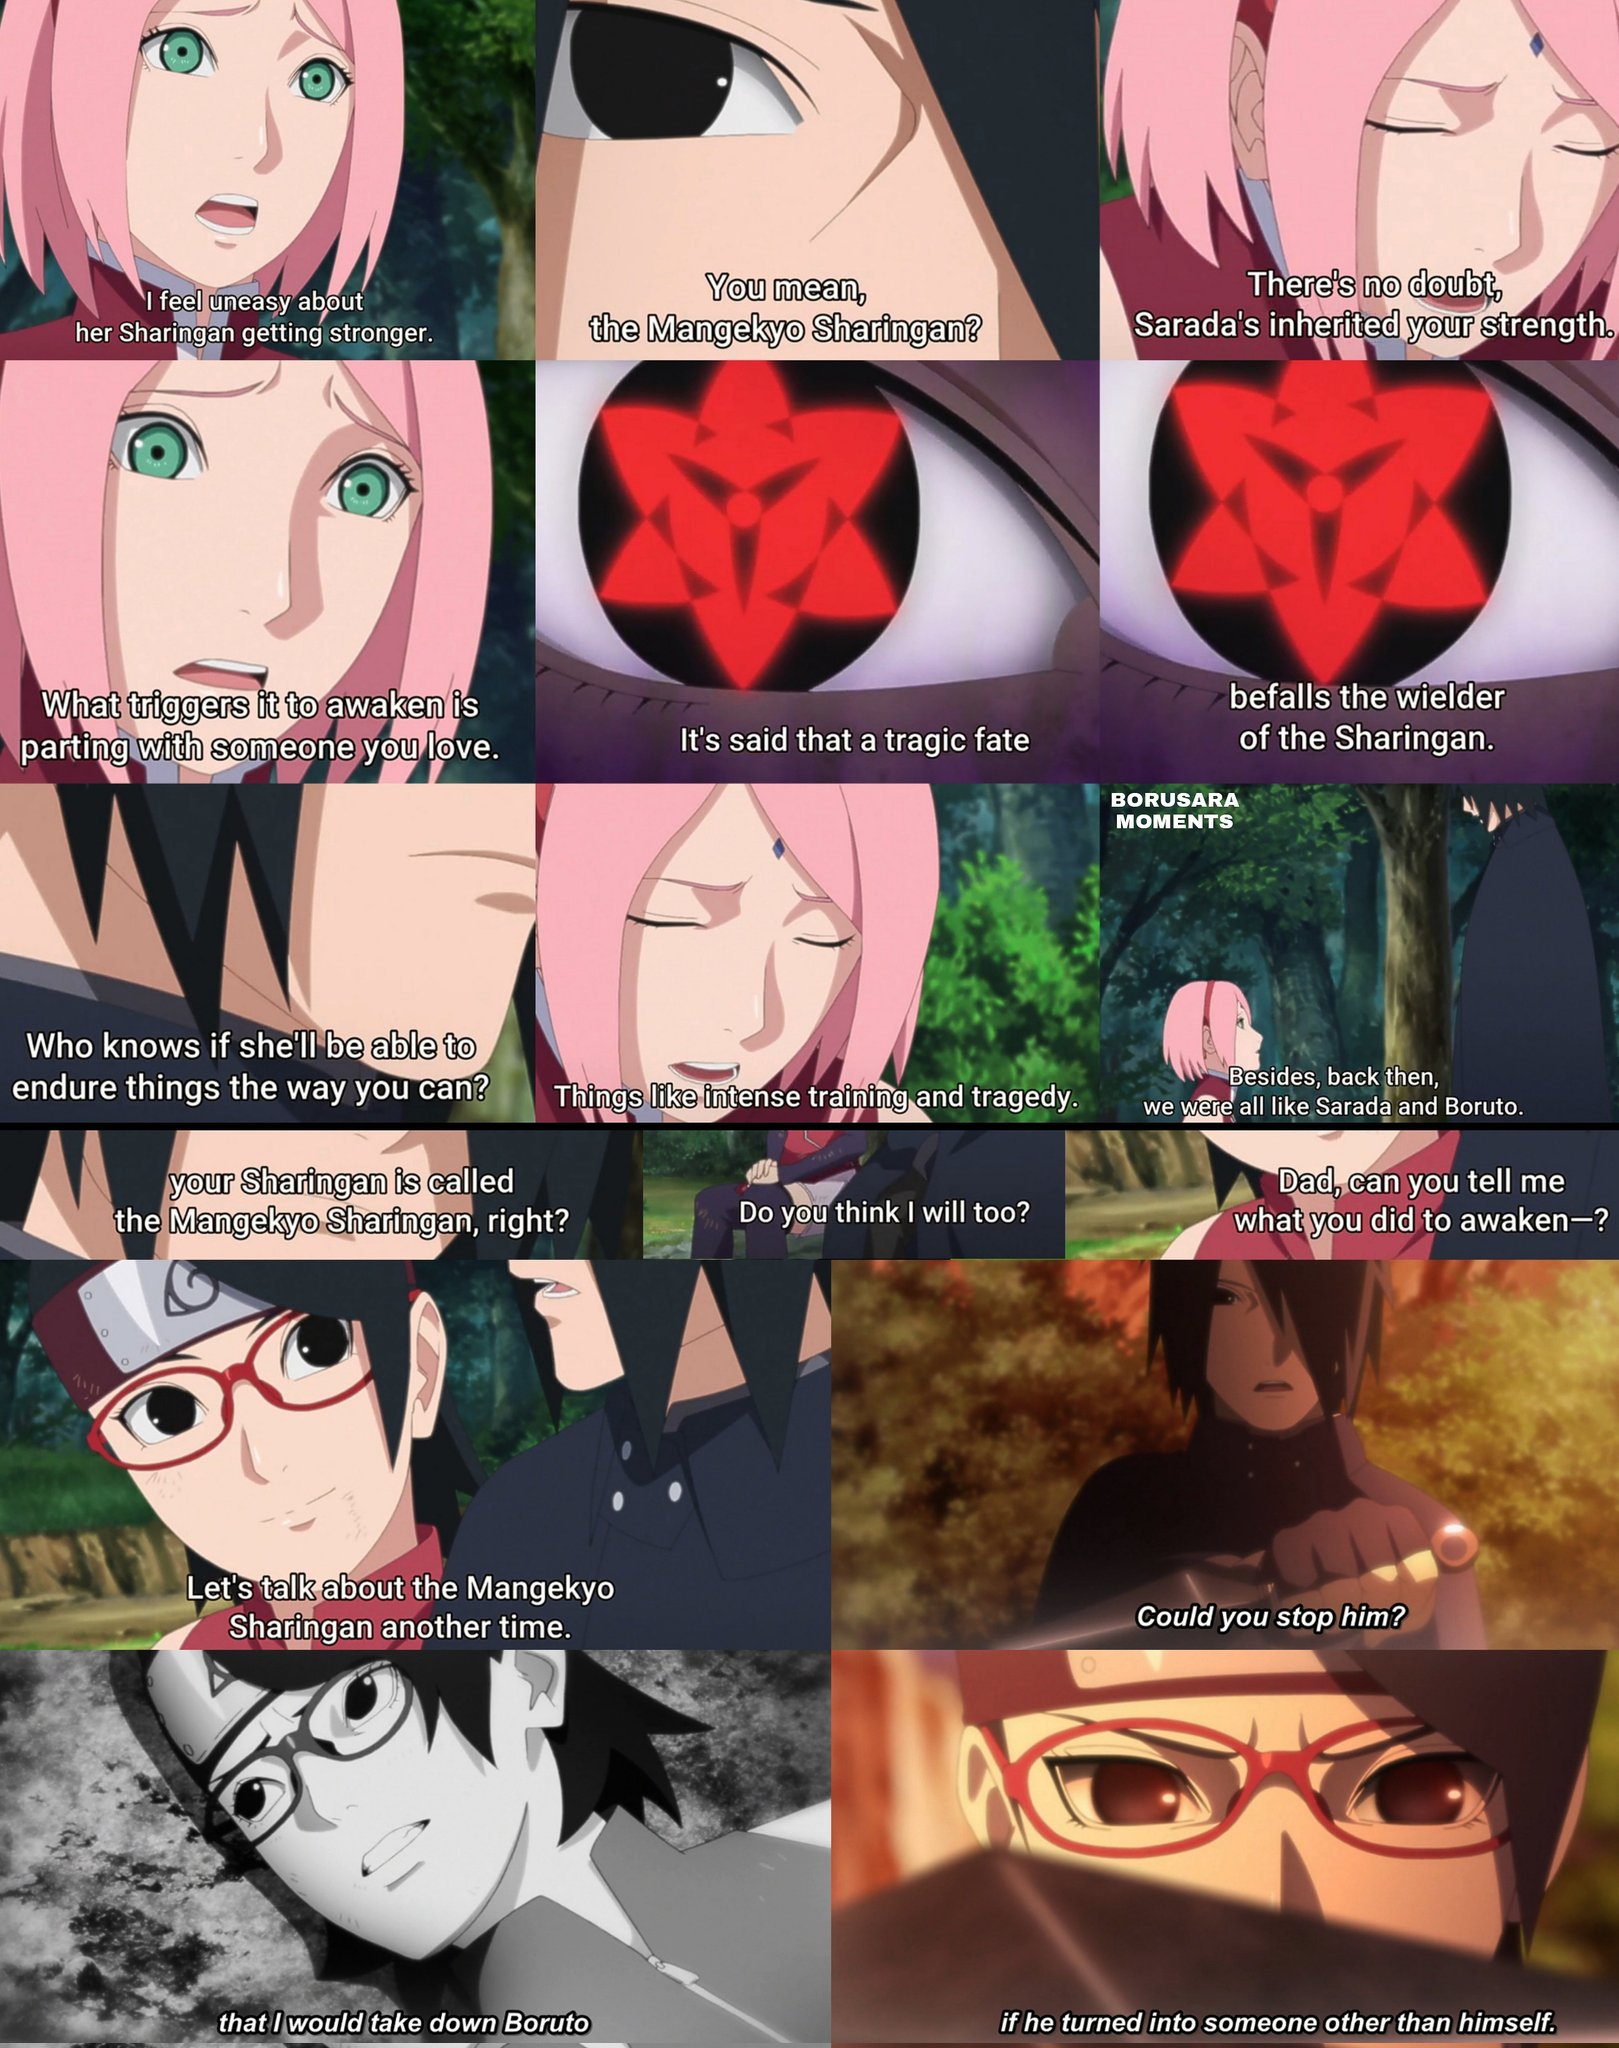 When Will Sarada Activate Her Mangekyou Sharingan? Find it Out